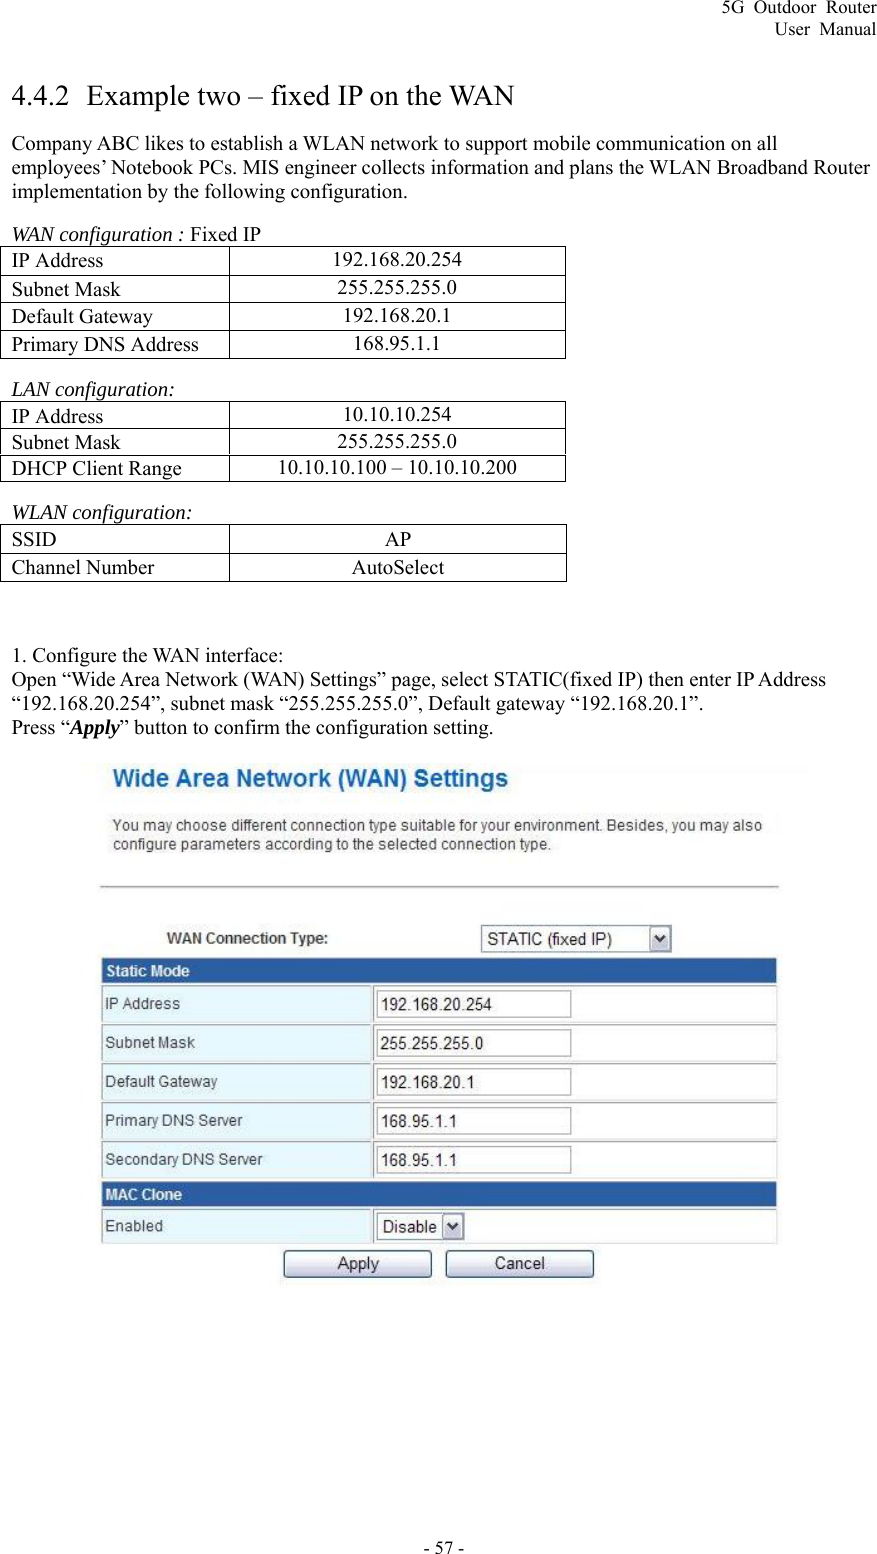 5G Outdoor Router User Manual - 57 -  4.4.2 Example two – fixed IP on the WAN Company ABC likes to establish a WLAN network to support mobile communication on all employees’ Notebook PCs. MIS engineer collects information and plans the WLAN Broadband Router implementation by the following configuration. WAN configuration : Fixed IP IP Address    192.168.20.254 Subnet Mask    255.255.255.0 Default Gateway    192.168.20.1 Primary DNS Address    168.95.1.1 LAN configuration: IP Address    10.10.10.254 Subnet Mask    255.255.255.0 DHCP Client Range    10.10.10.100 – 10.10.10.200 WLAN configuration: SSID   AP Channel Number    AutoSelect  1. Configure the WAN interface:   Open “Wide Area Network (WAN) Settings” page, select STATIC(fixed IP) then enter IP Address “192.168.20.254”, subnet mask “255.255.255.0”, Default gateway “192.168.20.1”. Press “Apply” button to confirm the configuration setting.   